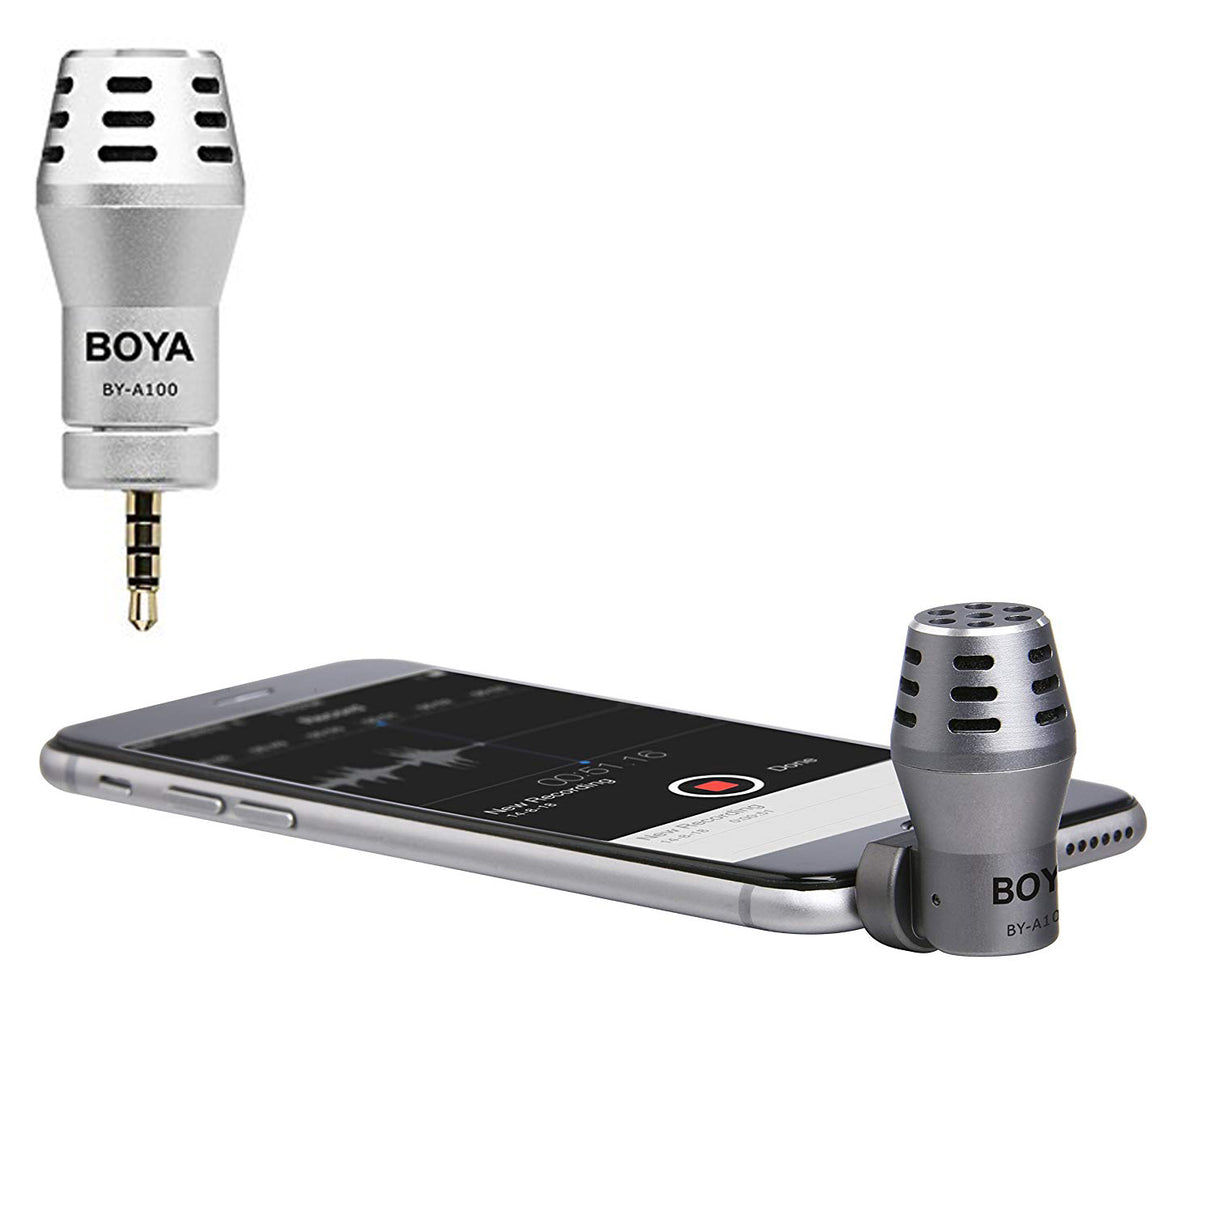 BOYA BY-A100 Omni Directional Condenser Microphone for IOS Android Smartphones Silver